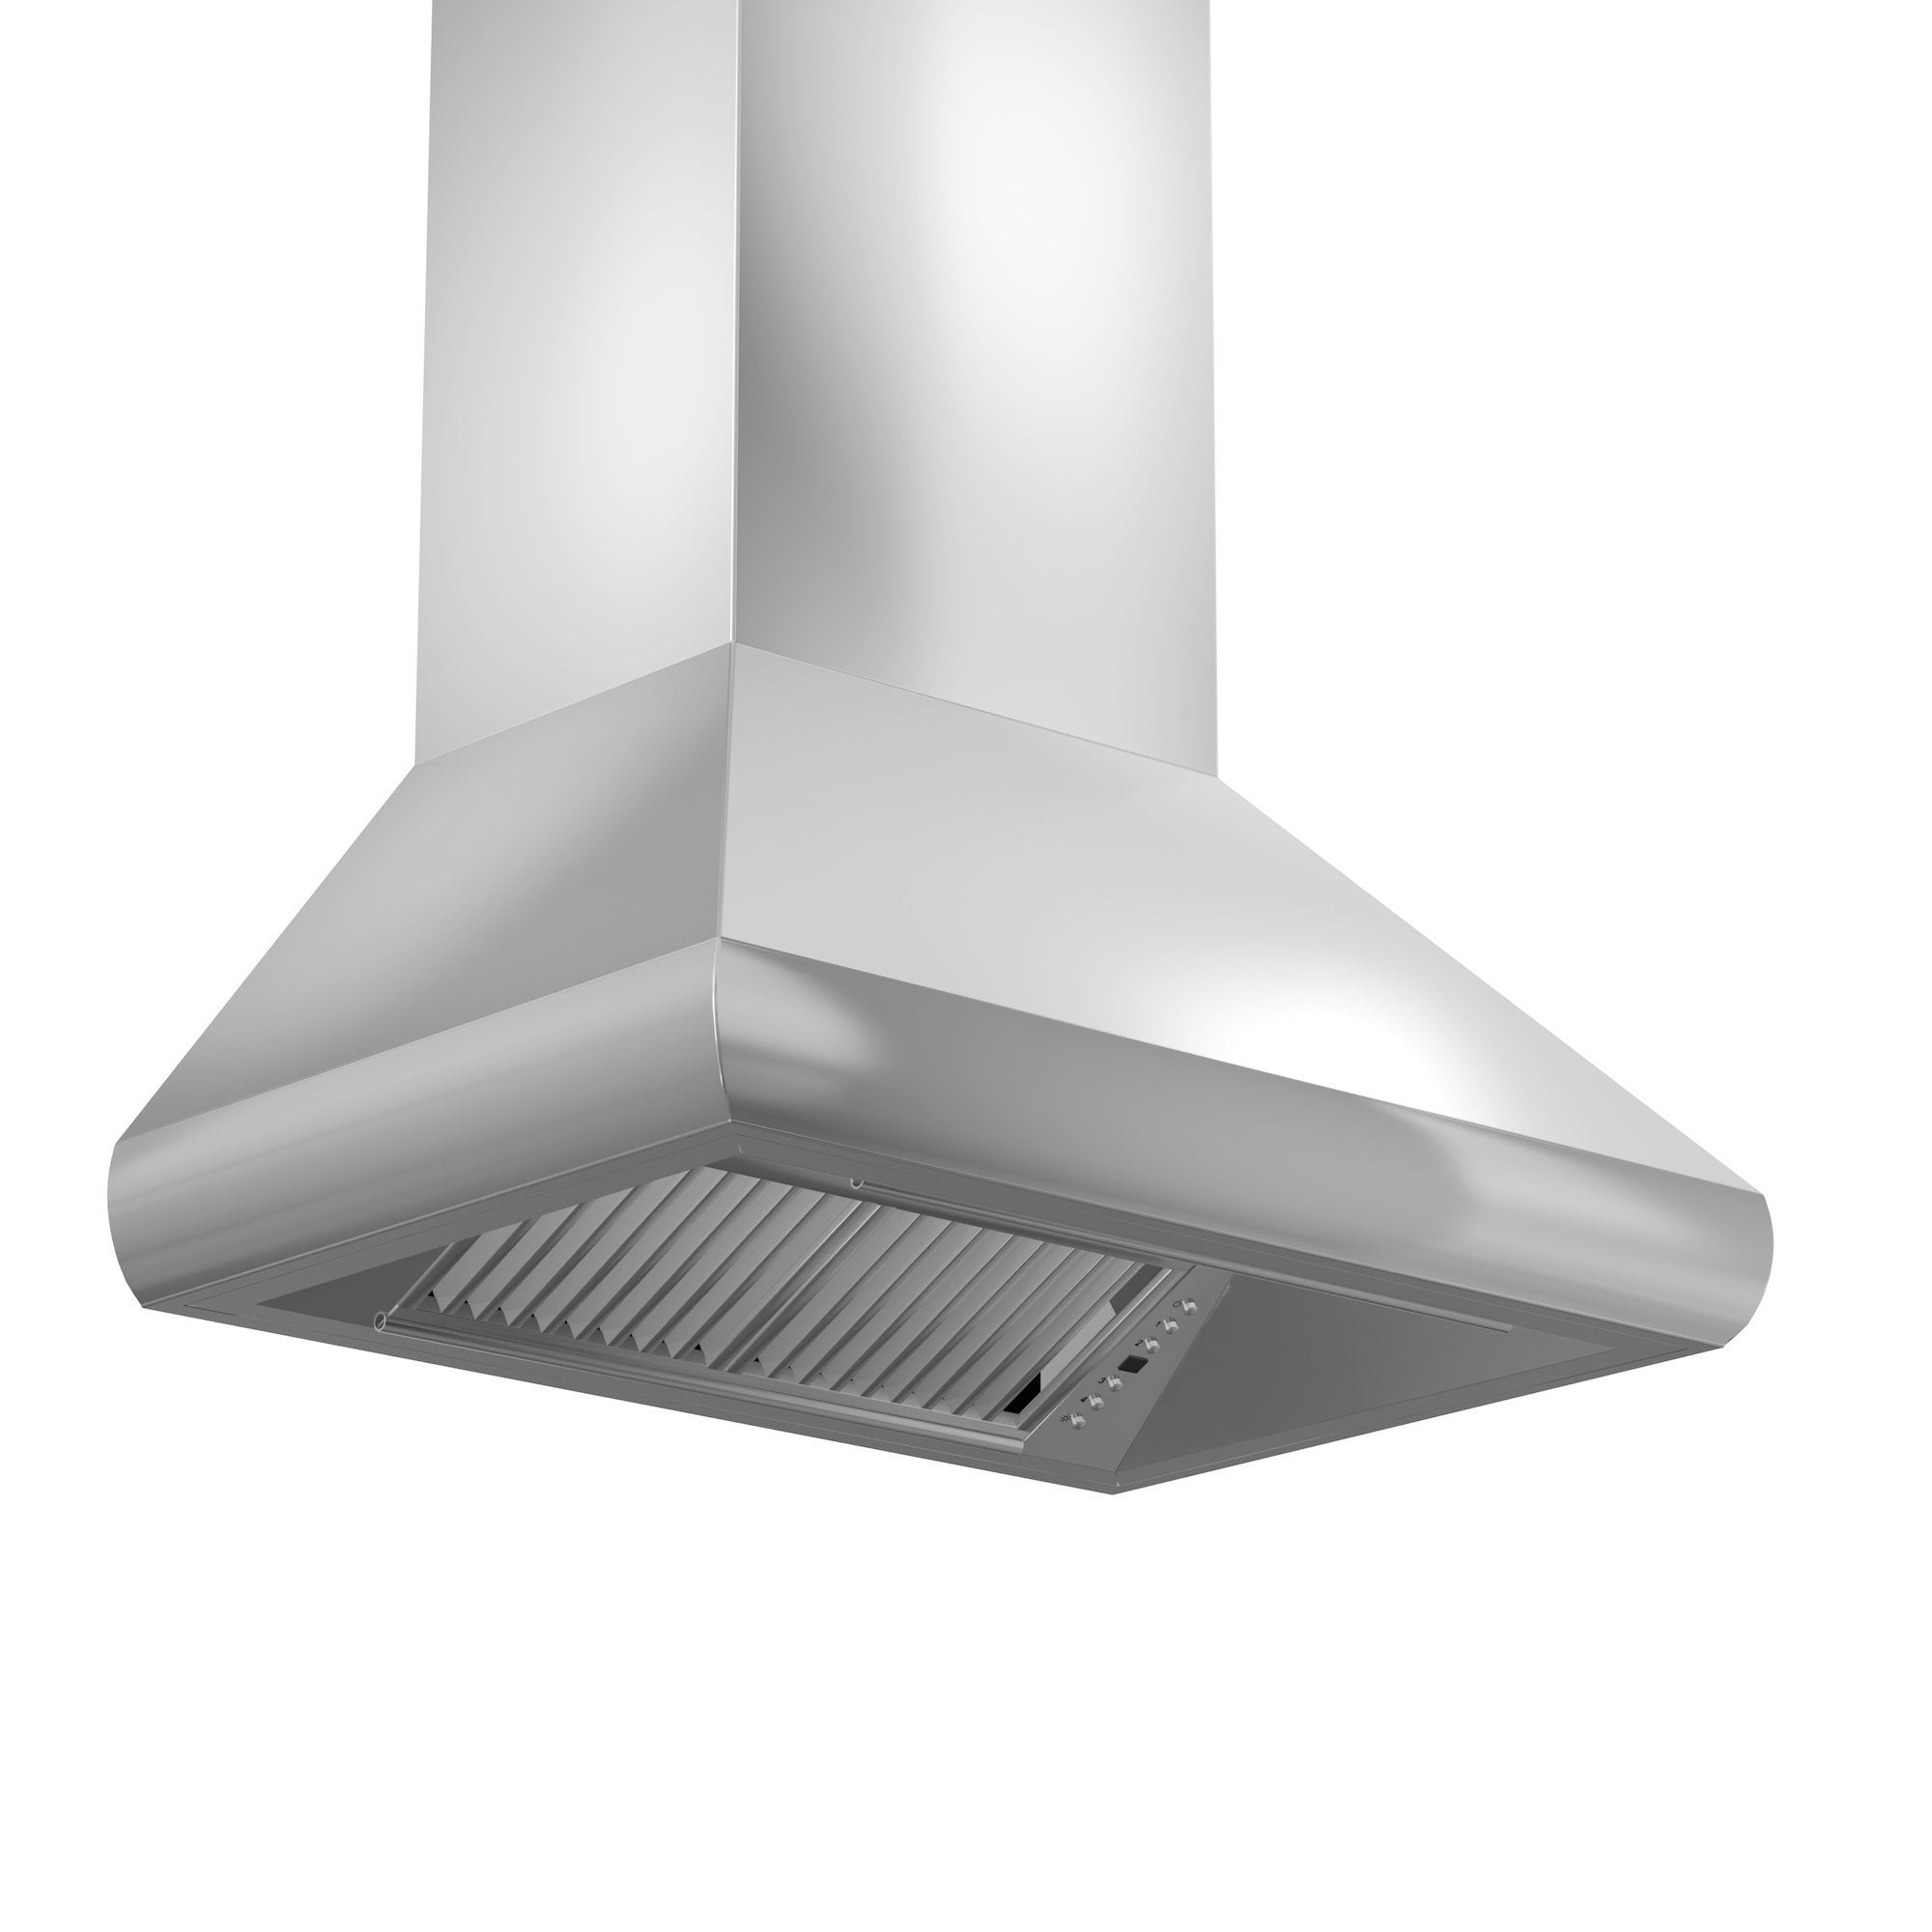 ZLINE Wall Mount Range Hood In Stainless Steel - Includes Remote Blower Options (587-RD/RS) - New Star Living